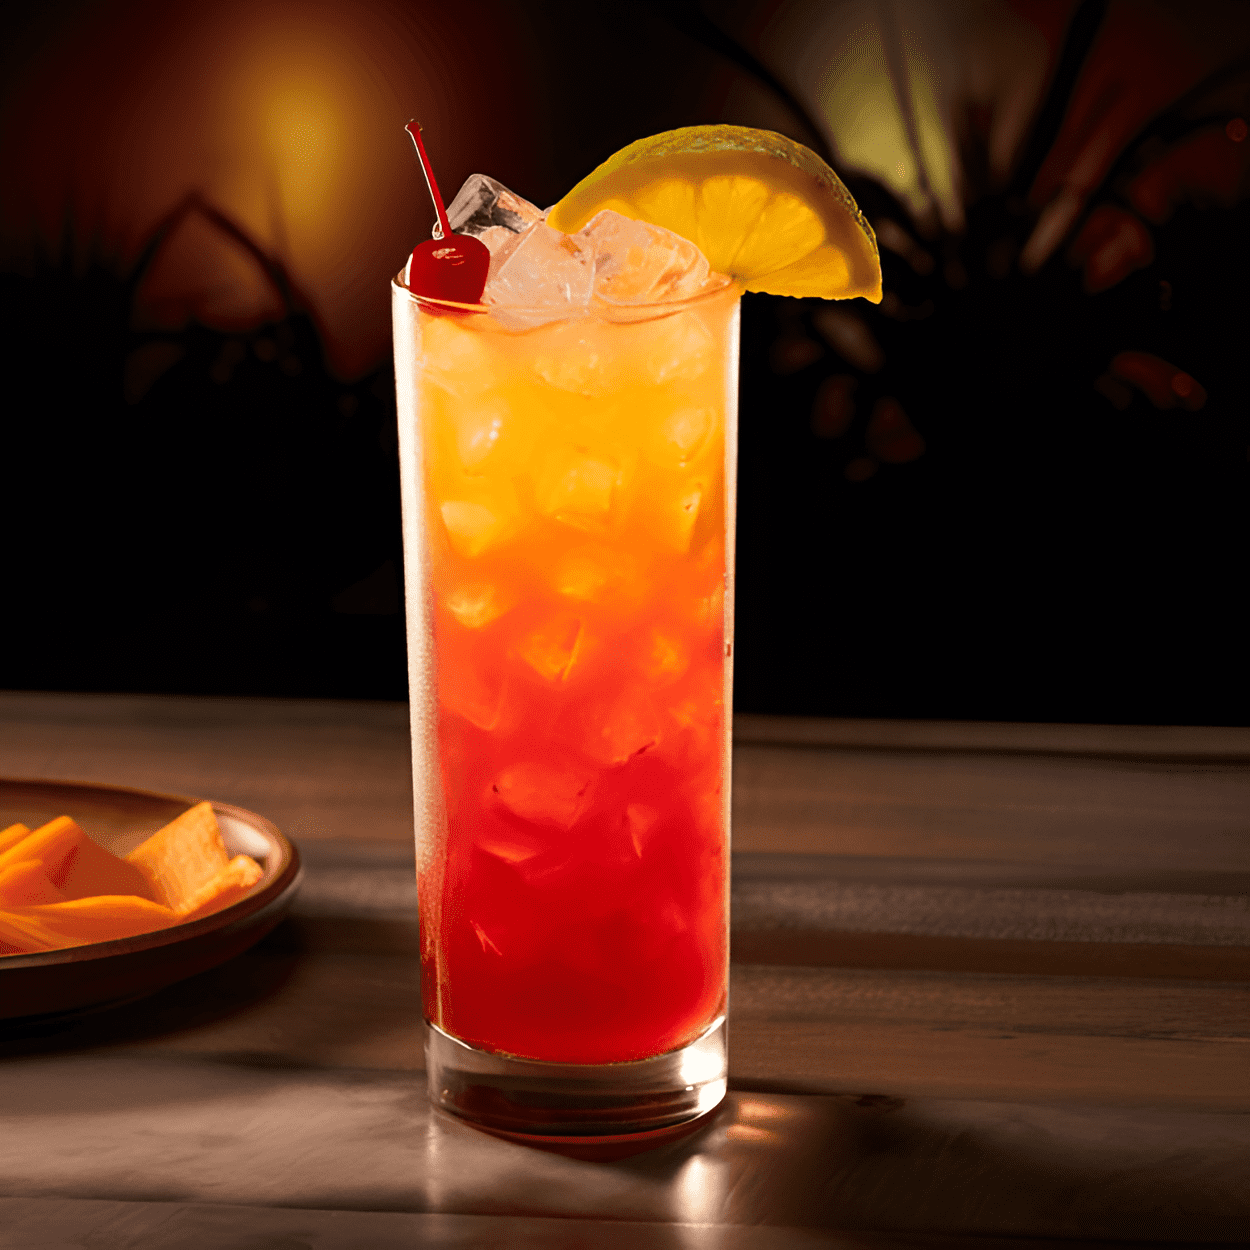 Wet Willies Cocktail Recipe - The Wet Willies cocktail is a delightful mix of sweet and sour, with a strong fruity flavor. The taste of rum is subtle, making it a light and refreshing drink. The combination of different fruit juices gives it a tropical, tangy taste that is incredibly refreshing.